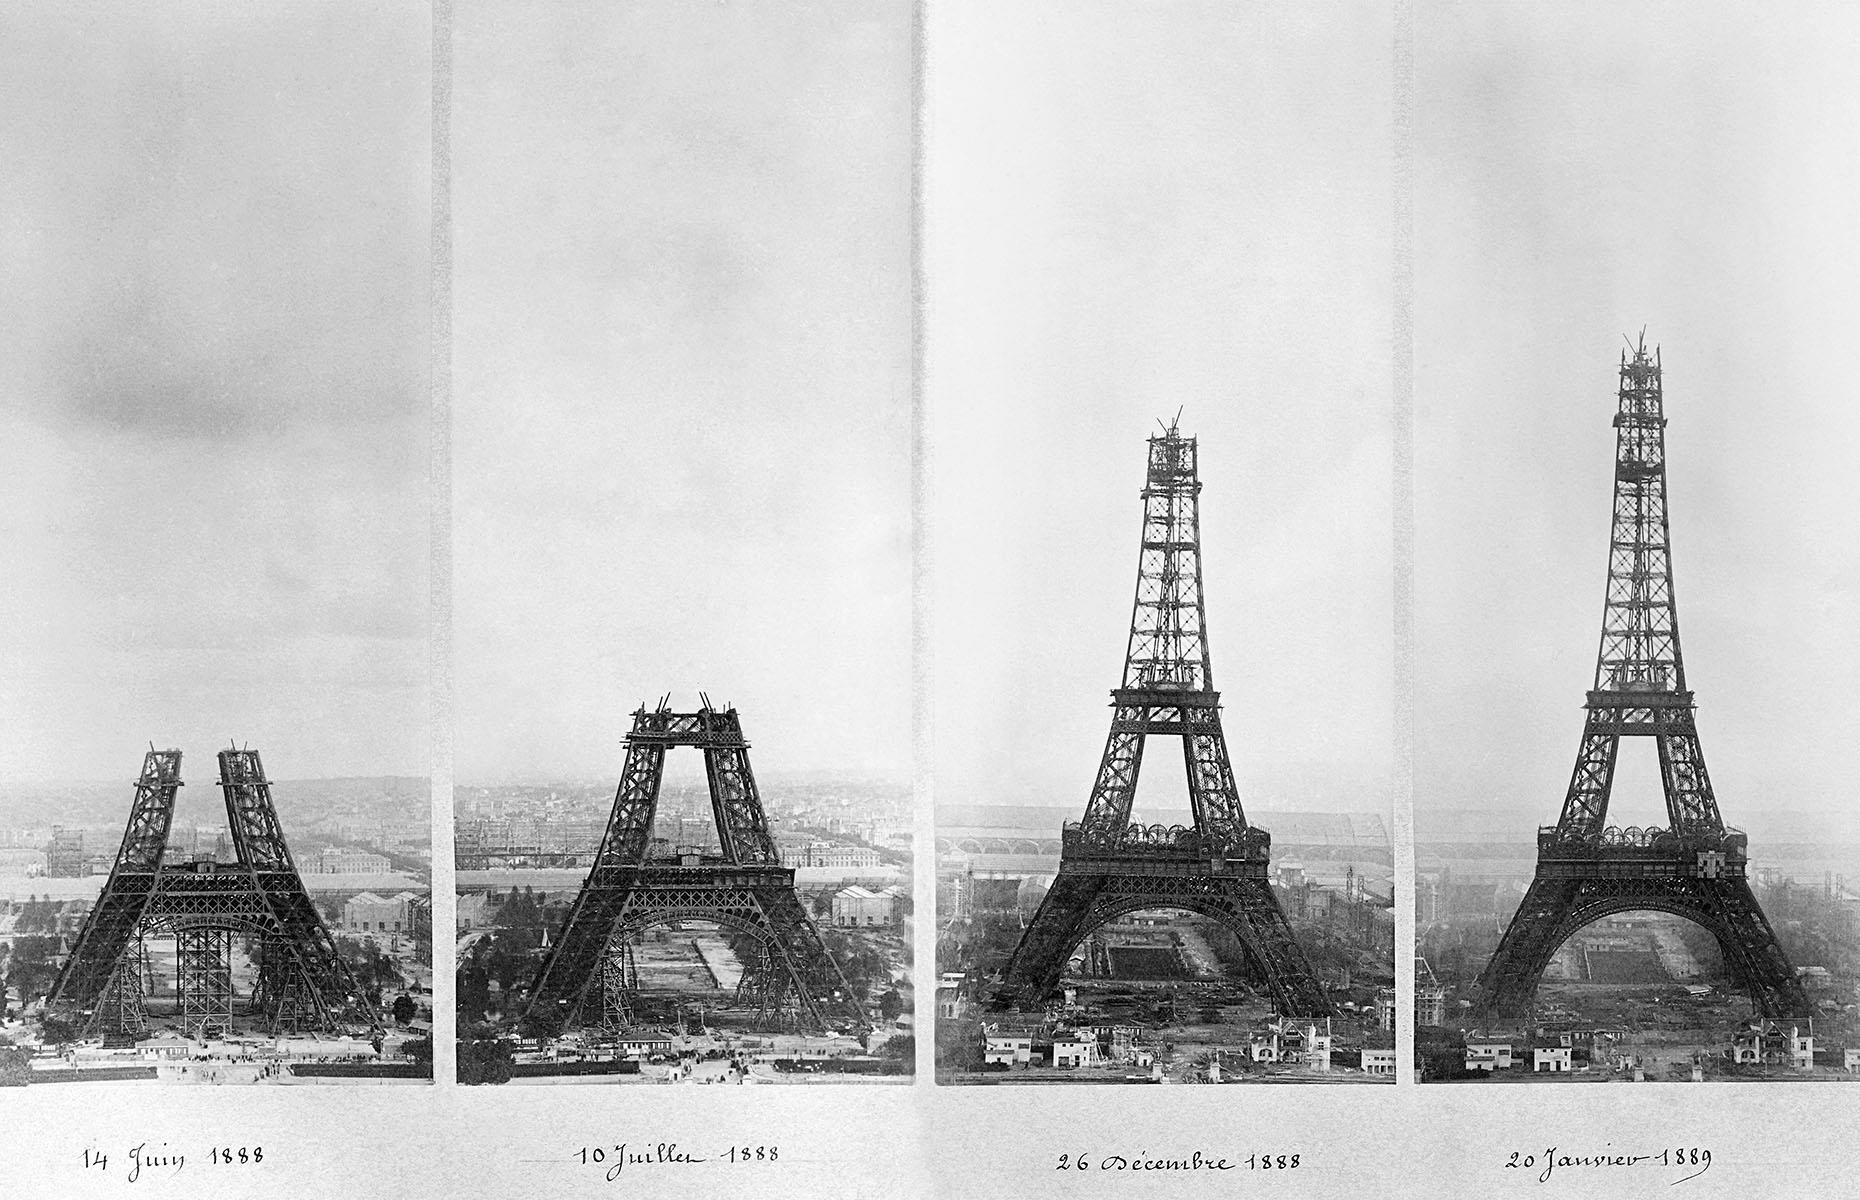 <p>The Eiffel Tower is famous around the world, a symbol not just of Paris and France but of style, sophistication and romance as well. But did you know it was only meant to stand for 20 years before being dismantled?</p>  <p><strong>Click through the gallery for the fantastic story of how the Eiffel Tower went from a temporary fairground attraction to a universally loved global icon...</strong></p>